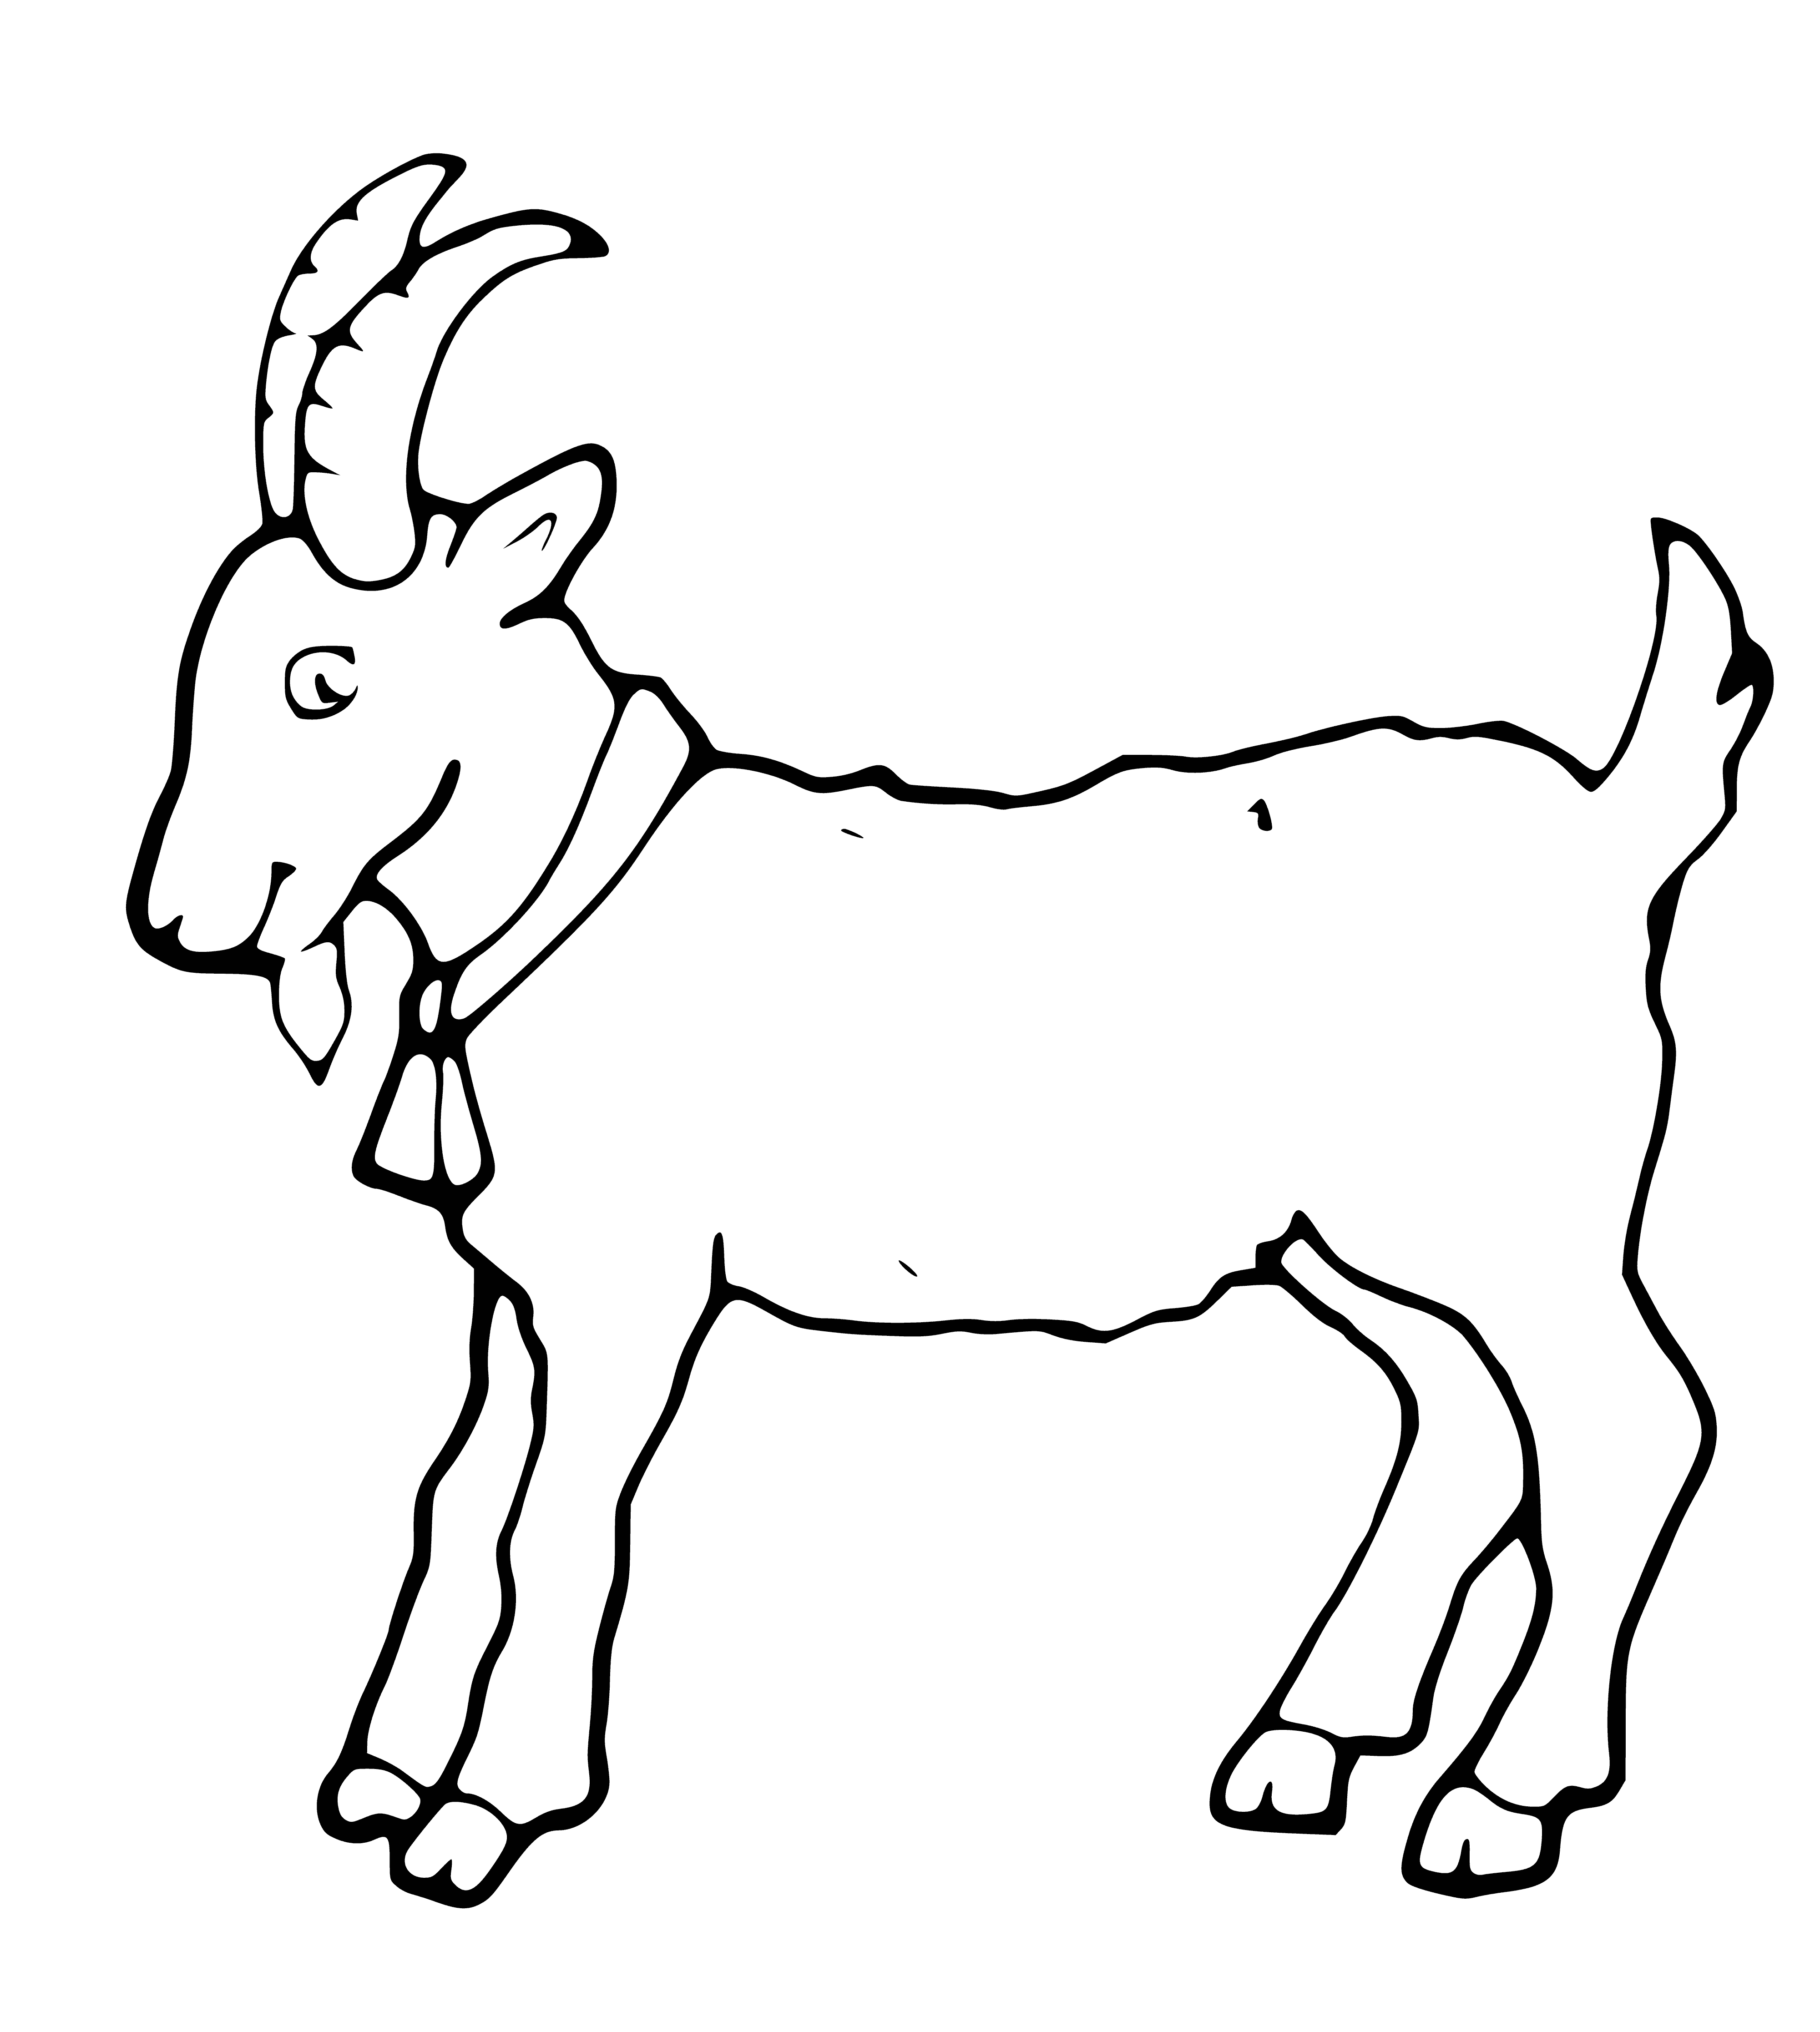 coloring page: A white goat with black spots stands on a hill and eats grass in the coloring page.